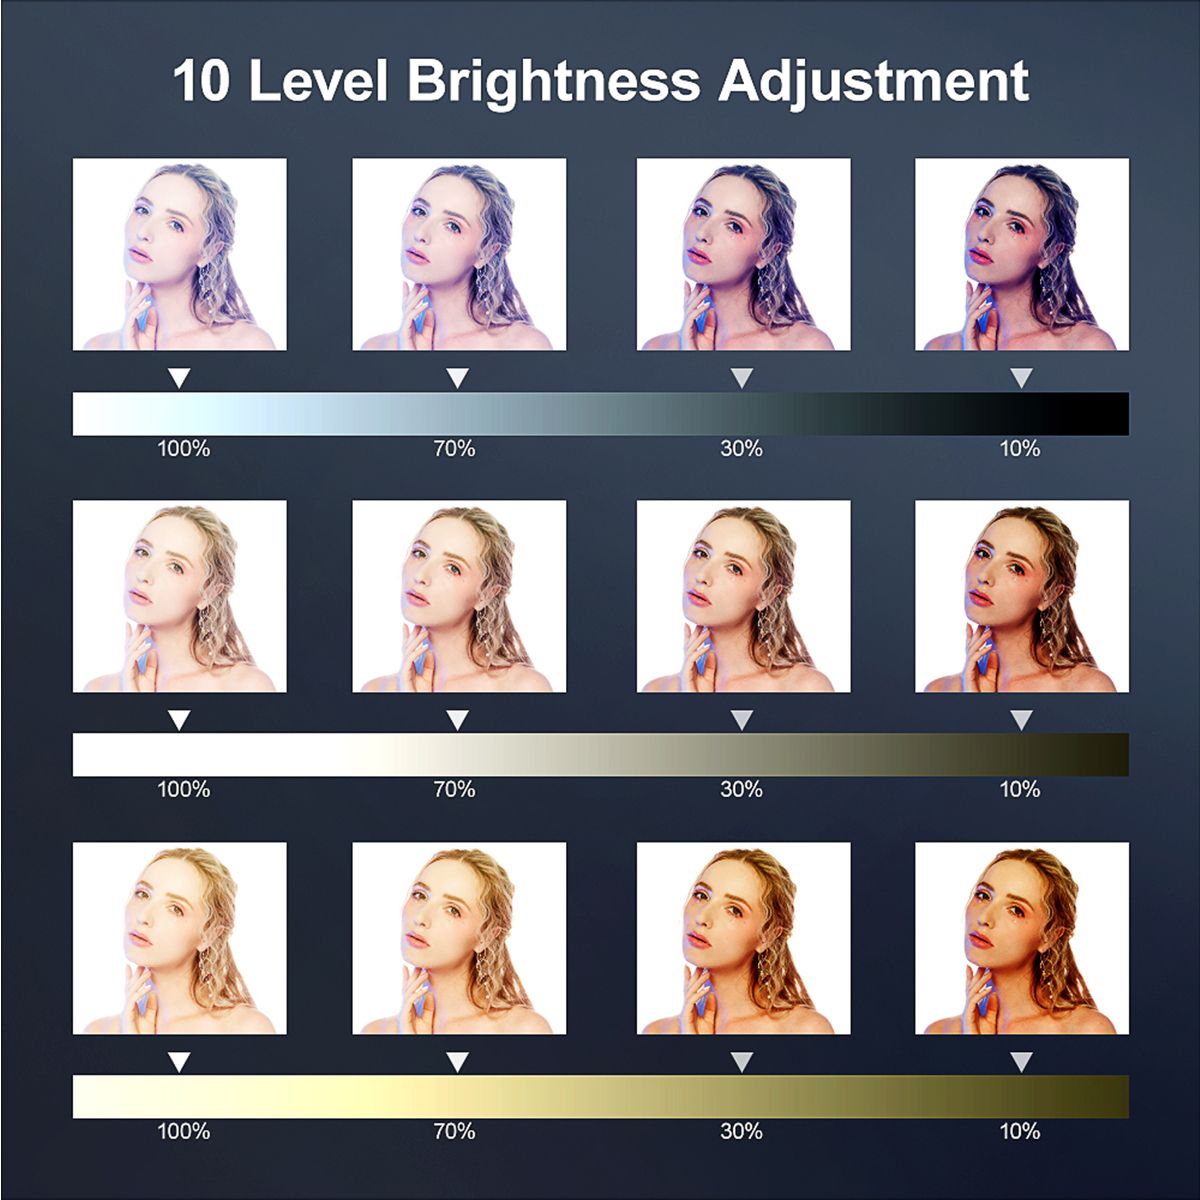 13-inch-Selfie-LED-Ring-Light-Fill-Light-Camera-Flashes-Light-Phone-Beauty-Lamp-3-Modes-Dimmable-For-1720352